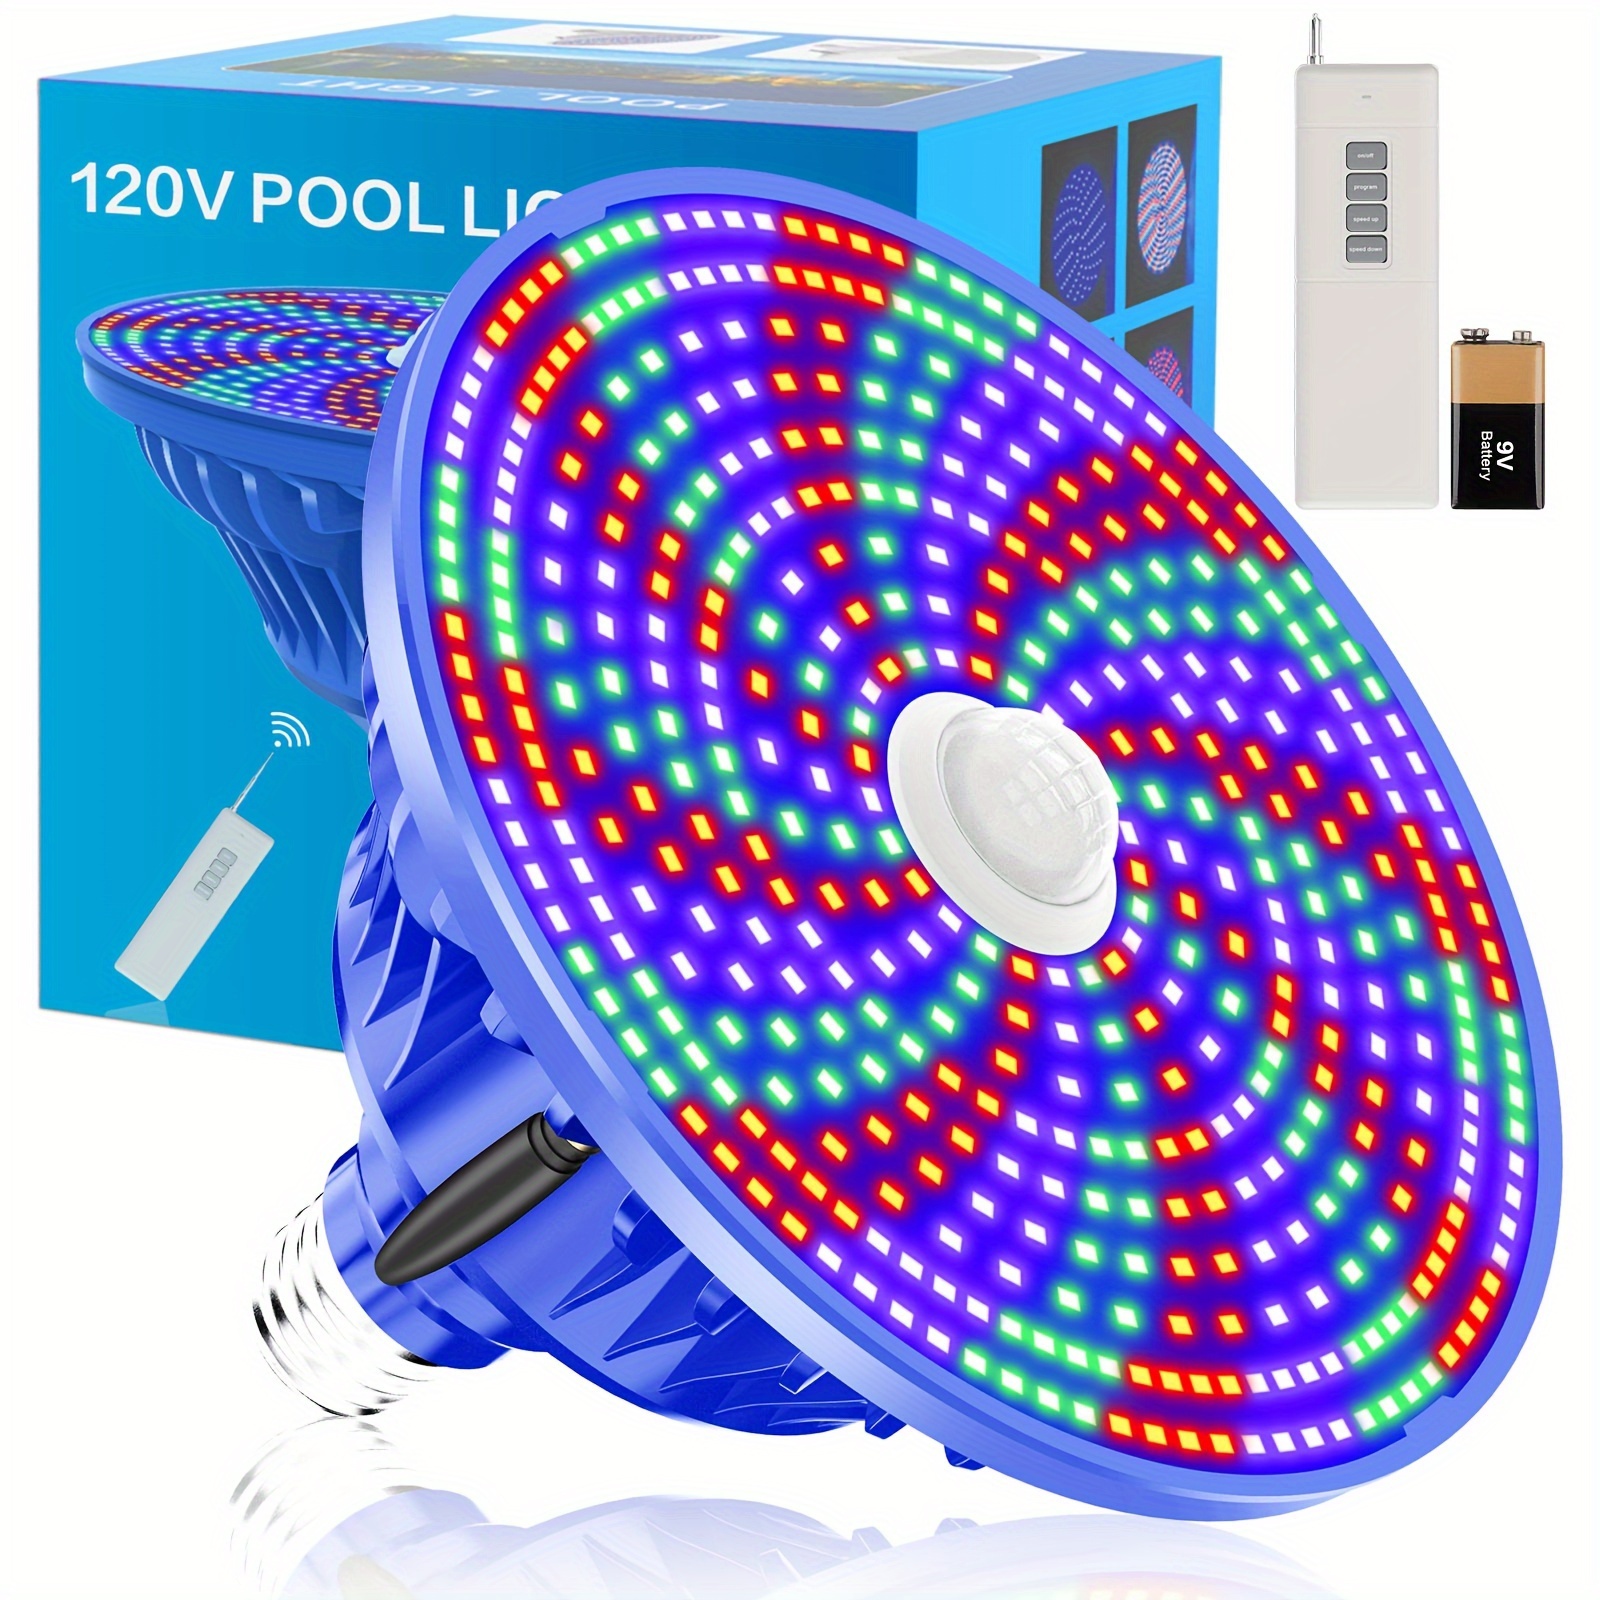 

Led Pool Lights For Inground Pool, Pool Light Bulb 120v 60w With Remote Control Rgb Color Change Led Pool Lights, Base E26/e27 Replacement Bulb For Pentair And Hayward Fixture Blue